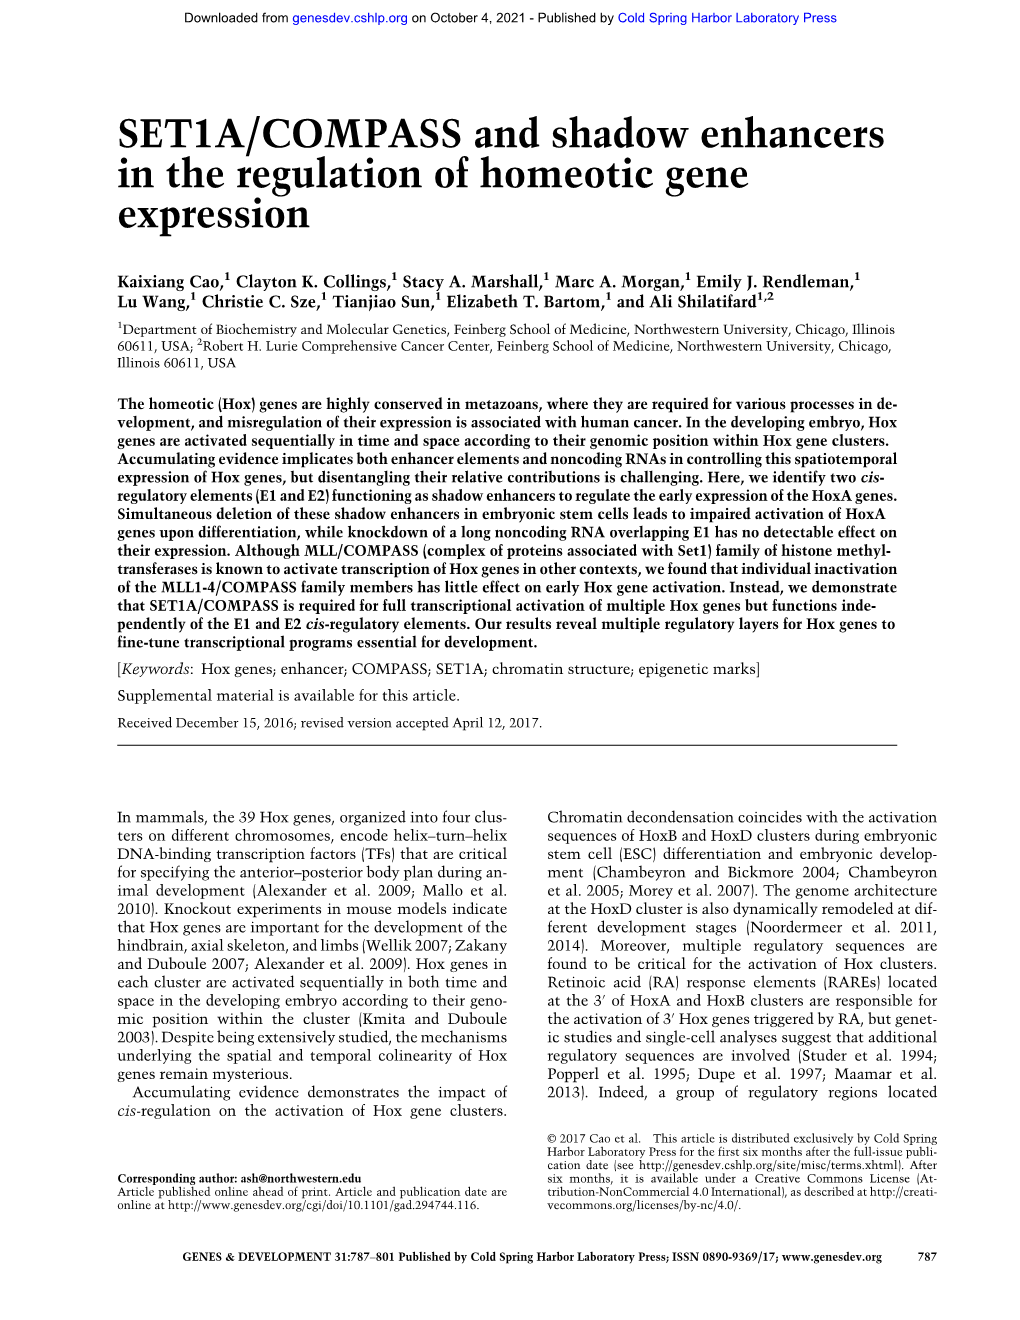 SET1A/COMPASS and Shadow Enhancers in the Regulation of Homeotic Gene Expression